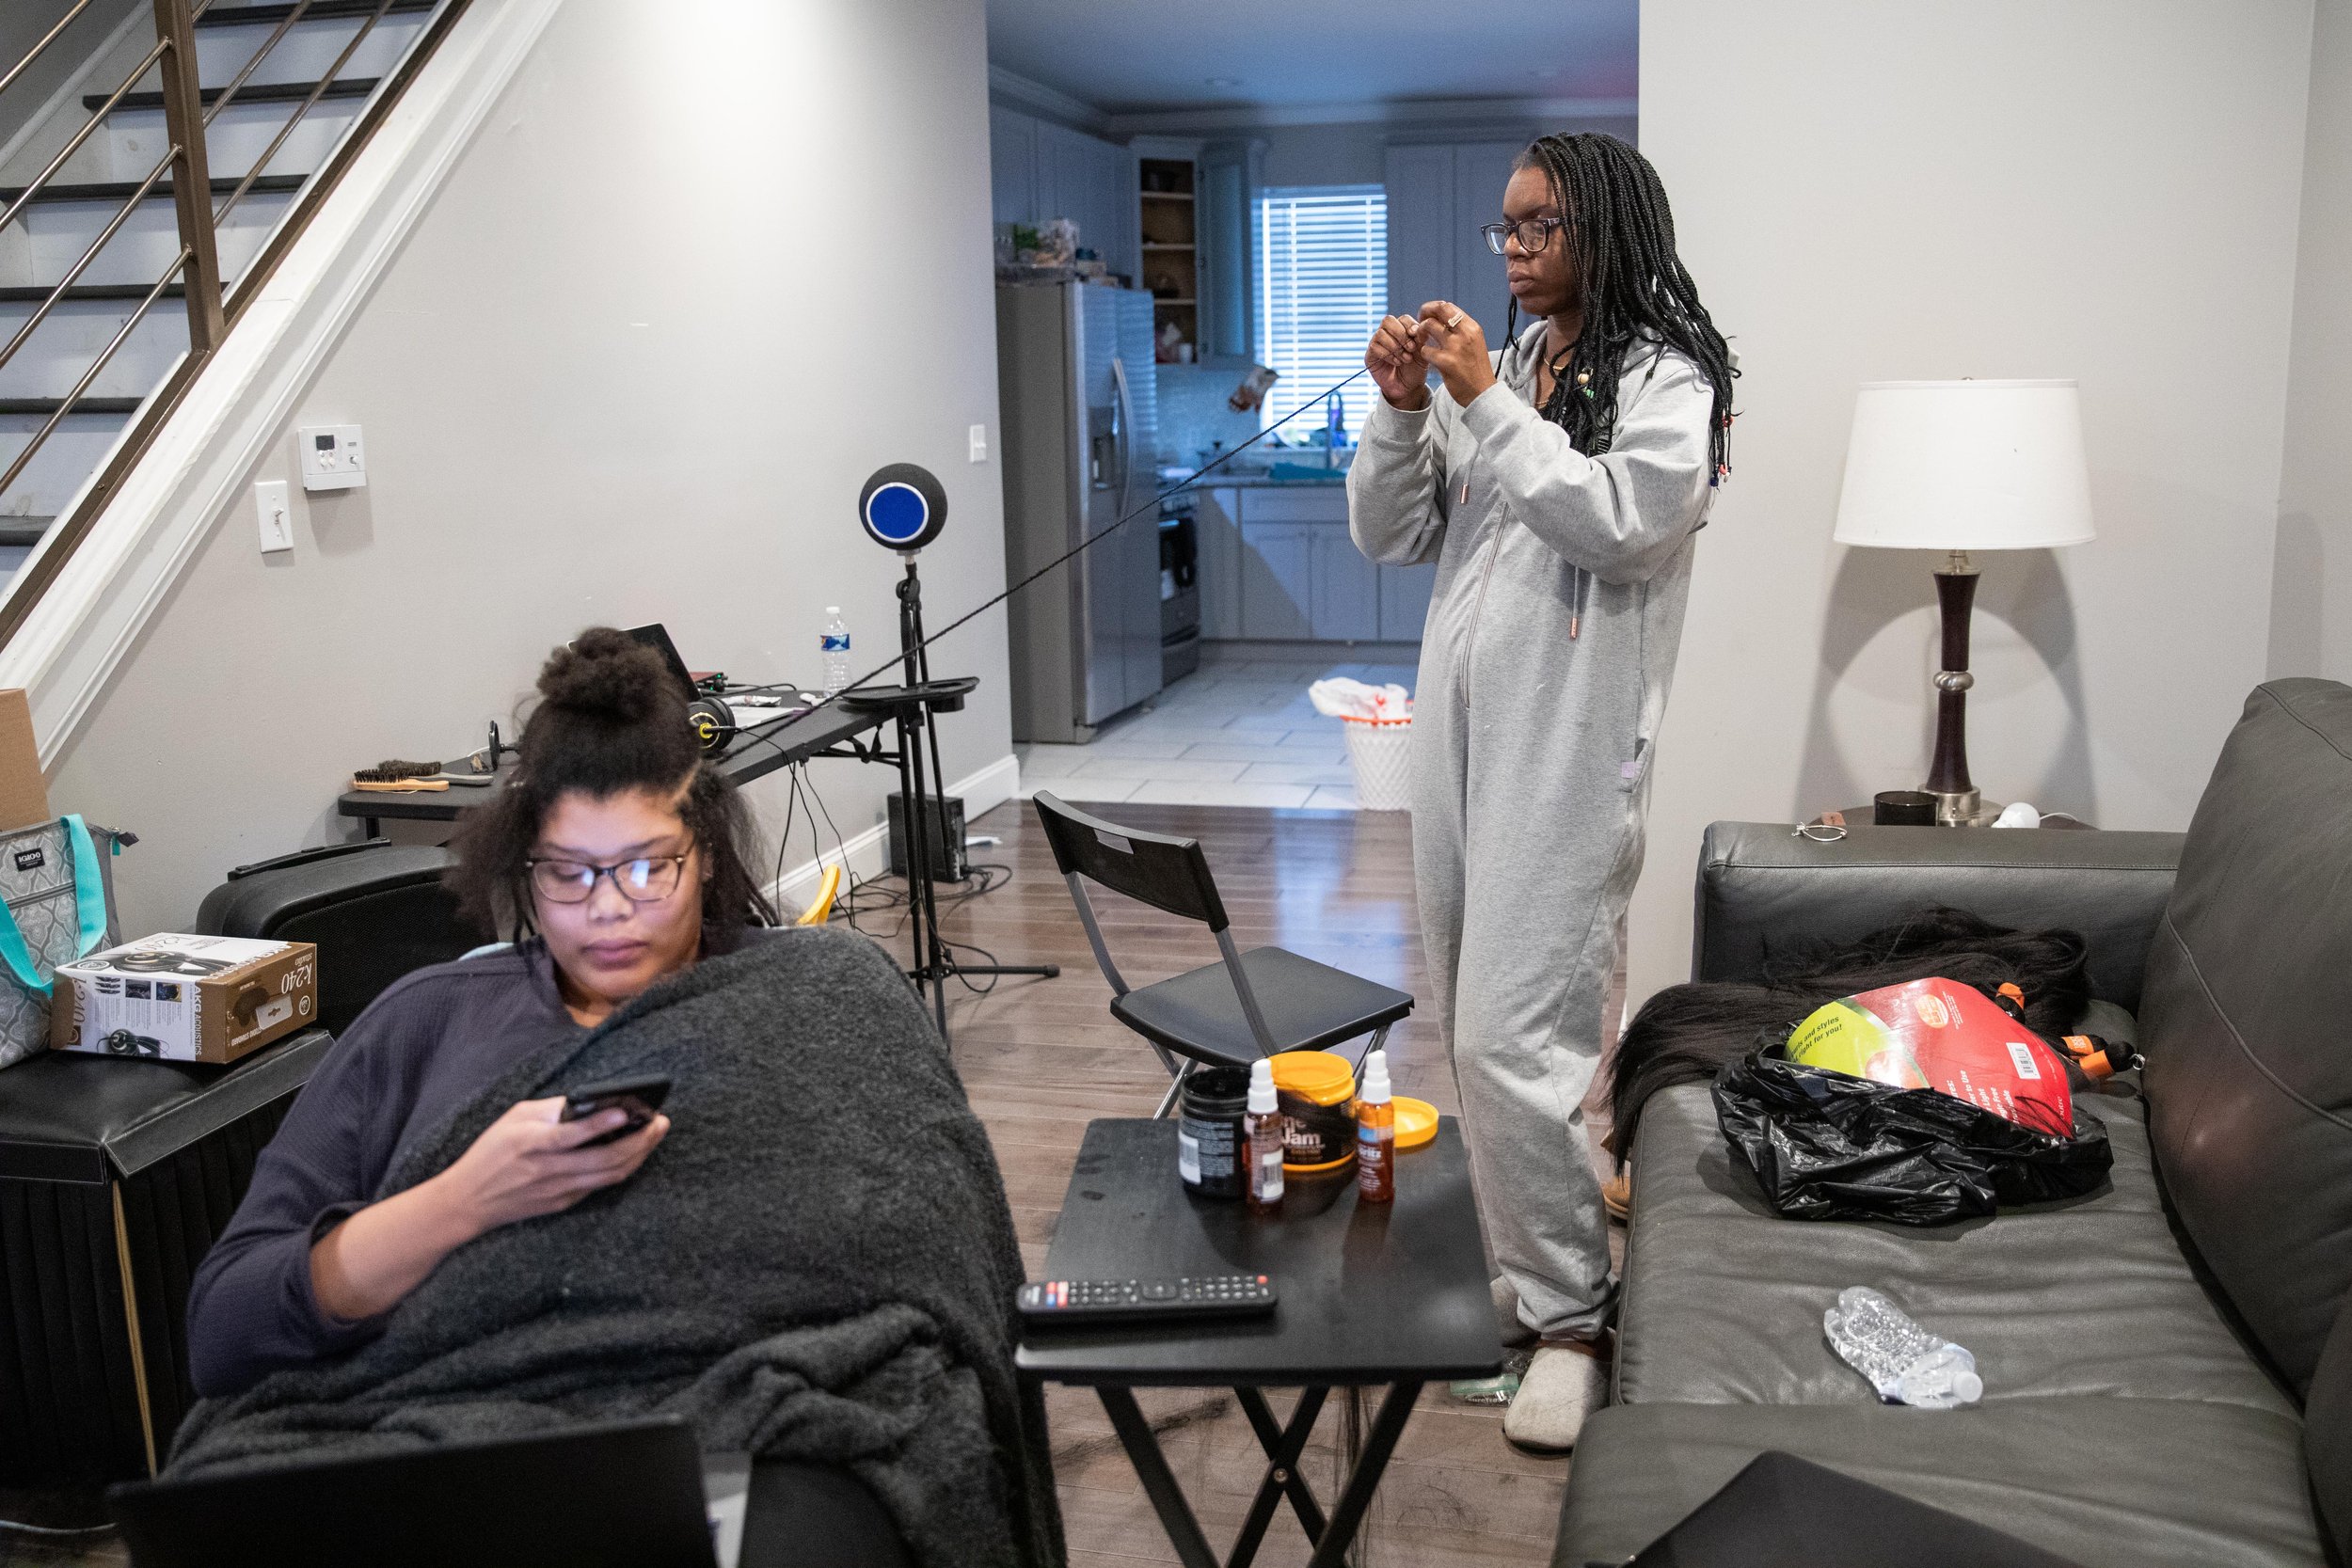   Miarei Harris, owner of BraidsByMi, braids hair extensions for her client at her home in North Philadelphia on Feb. 11, 2021.  